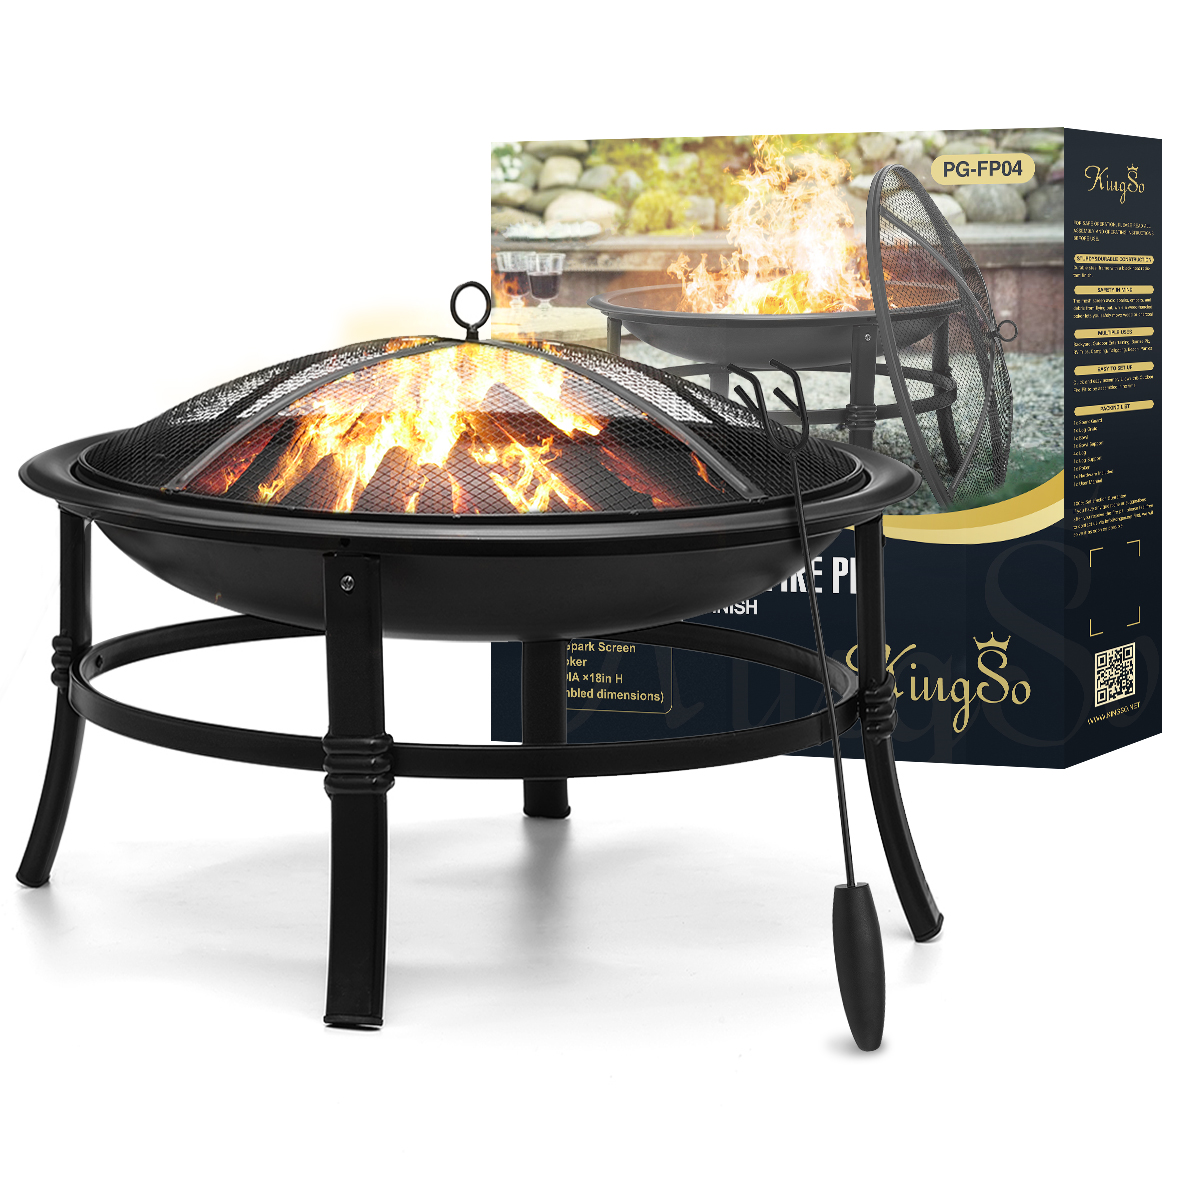 Kingso-26-inch-Fire-Pit-Wood-Burning--Small--Heavy-Duty-Steel-Firepit-with-Spark-Screen-Log-Grate-Po-1822387-13